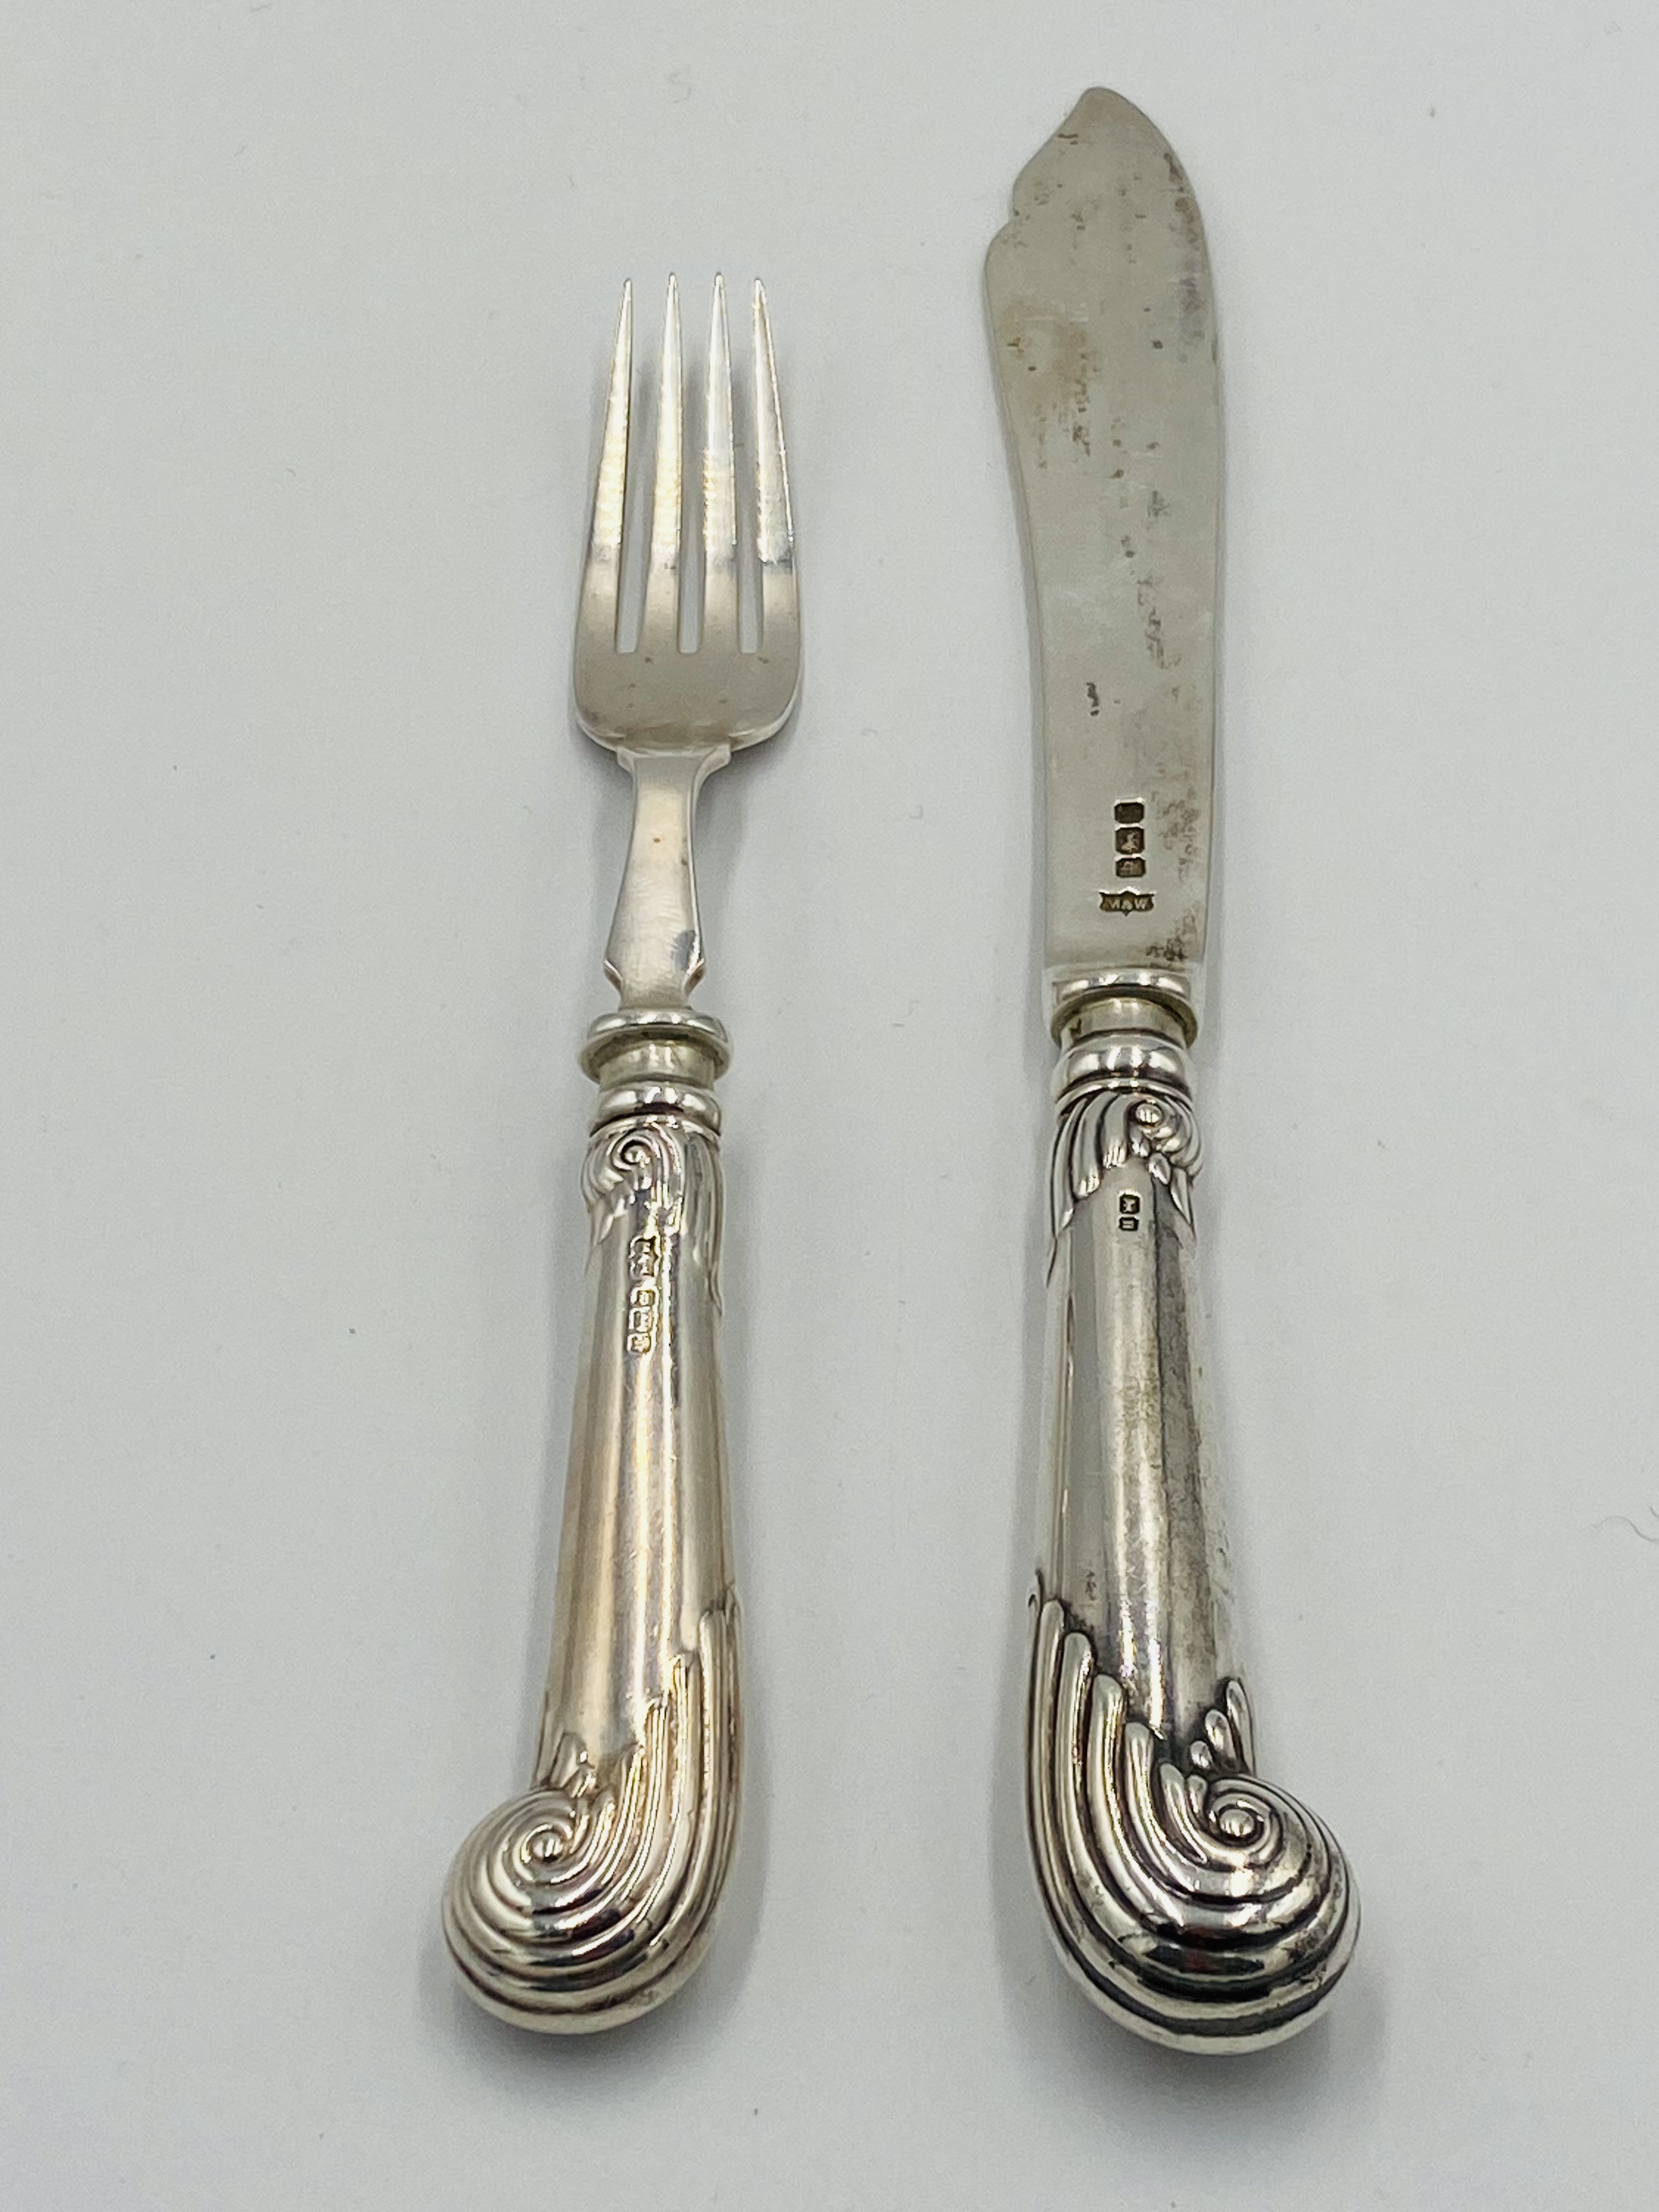 Twelve place set of silver pistol grip fish knives and forks, London 1905 - Image 5 of 11